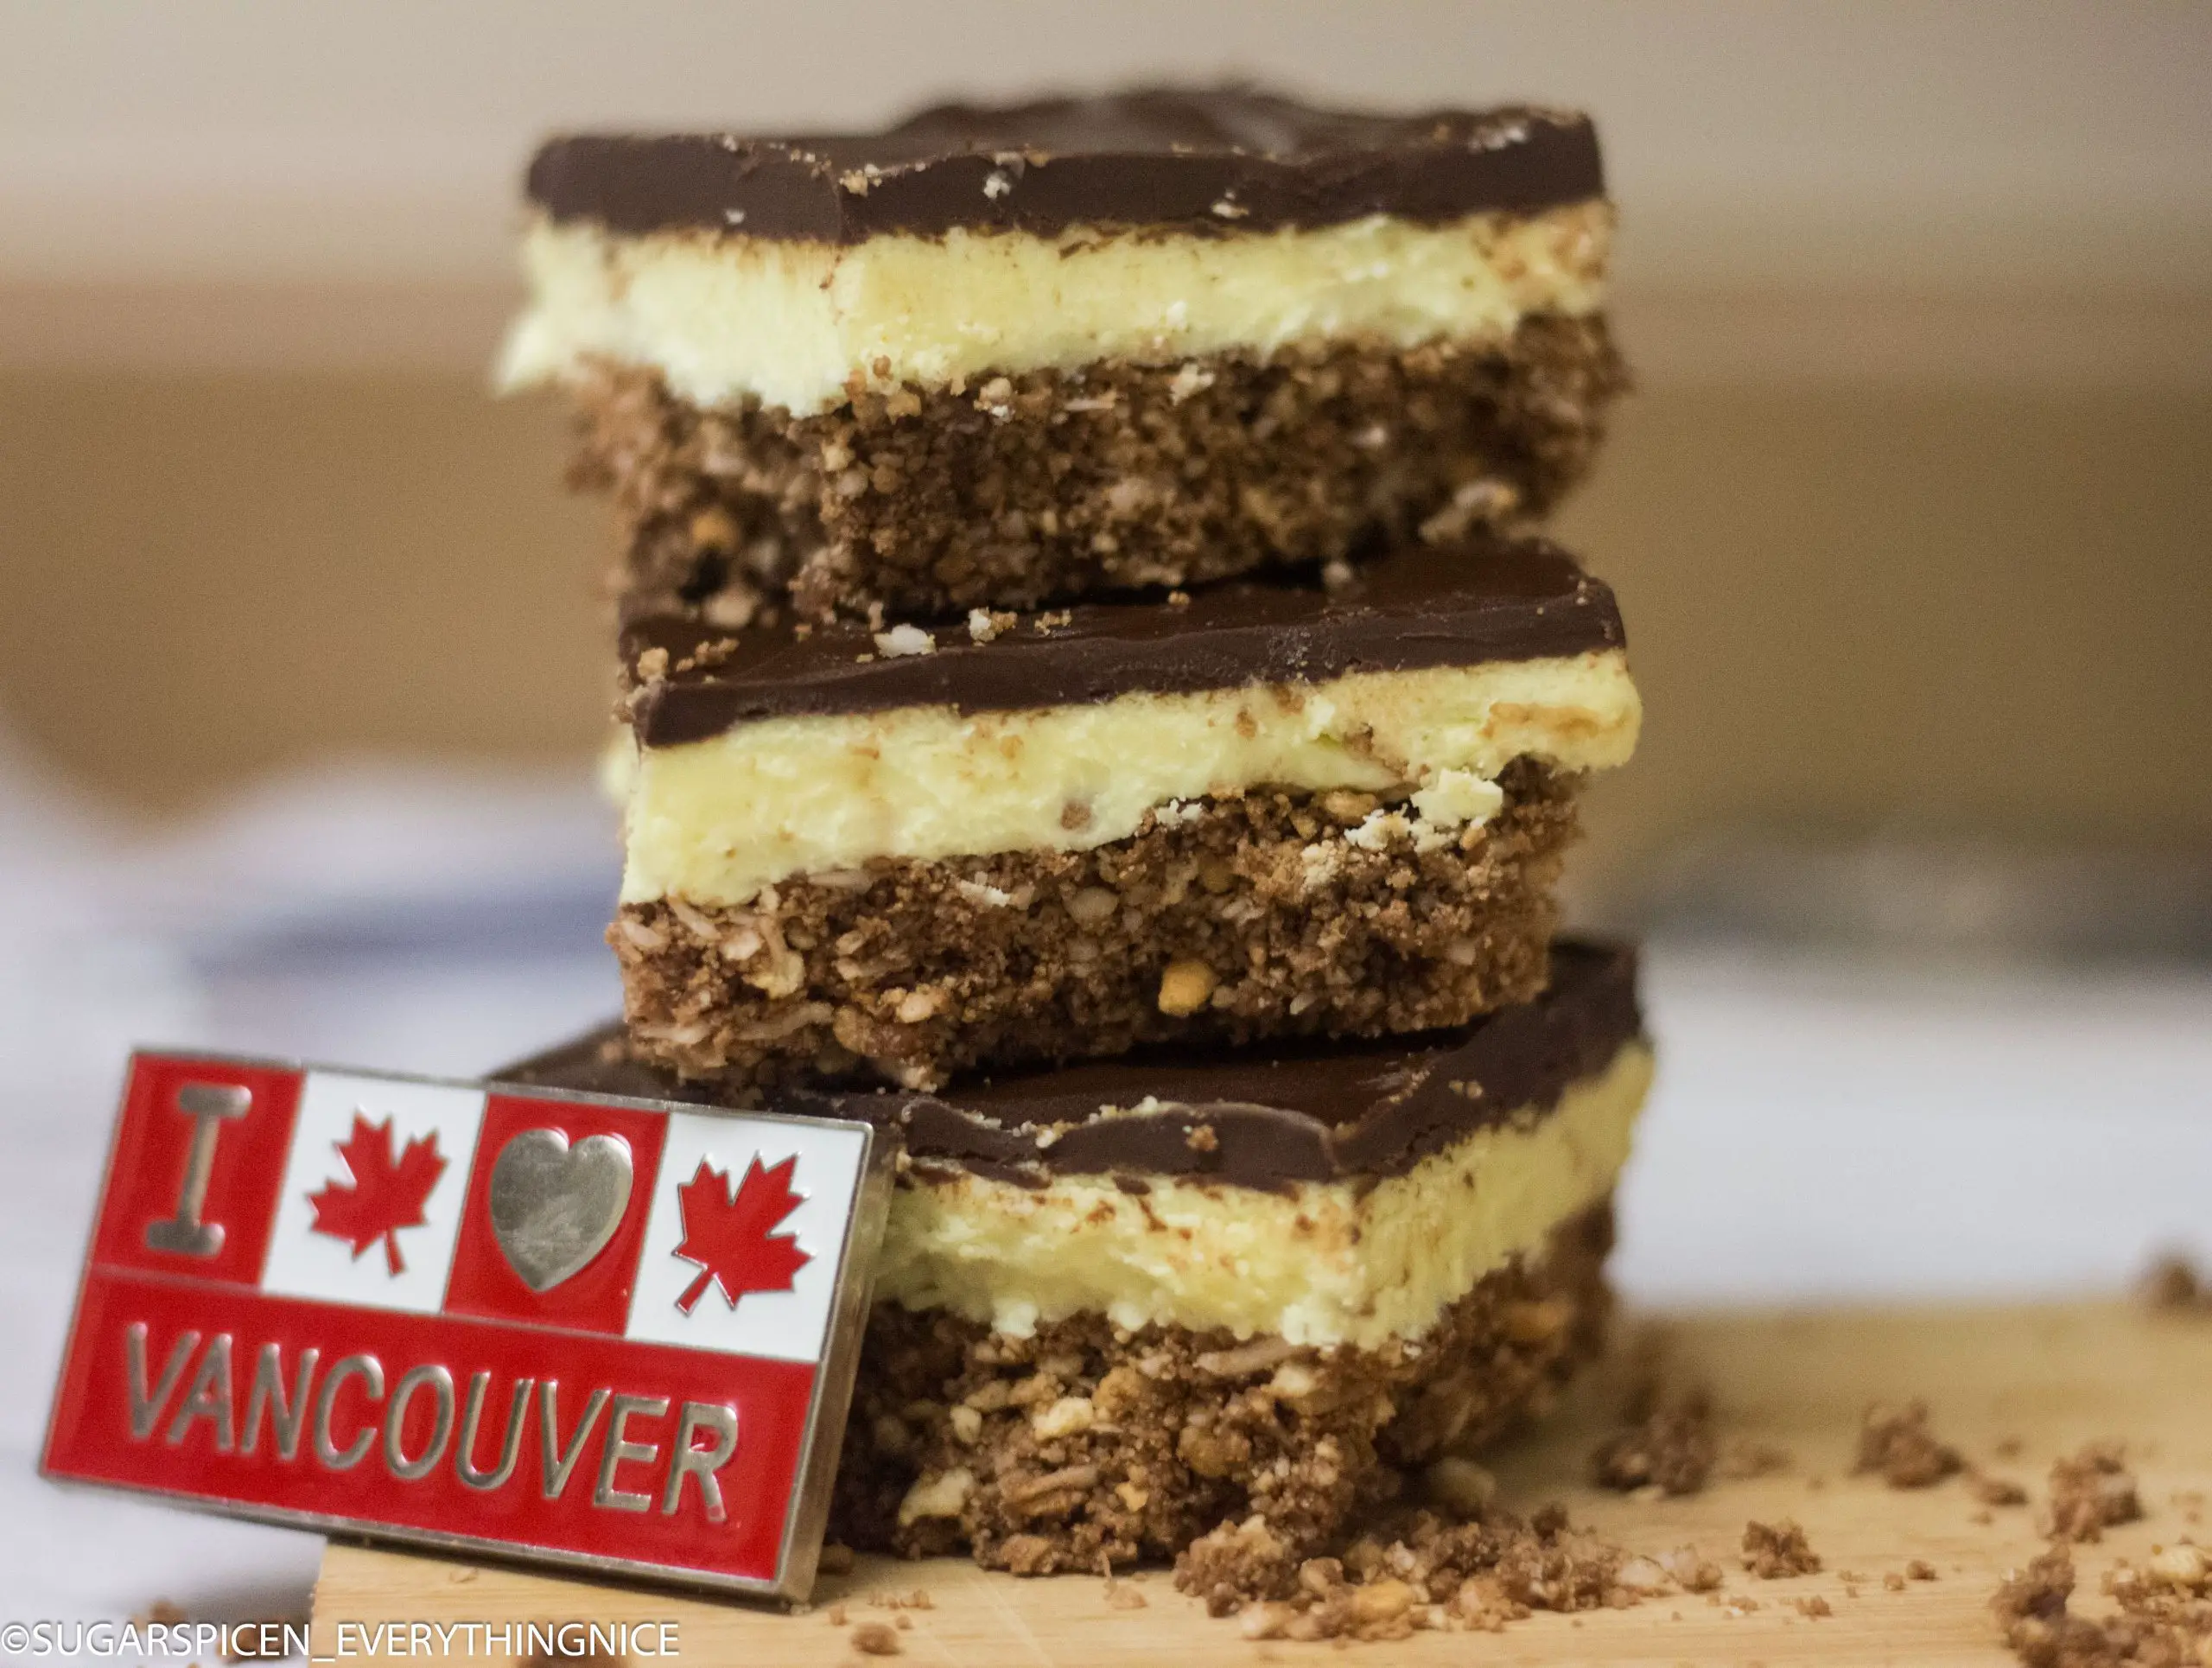 I love Vancouver magnet is leaning against stack of 3 Nanaimo bars